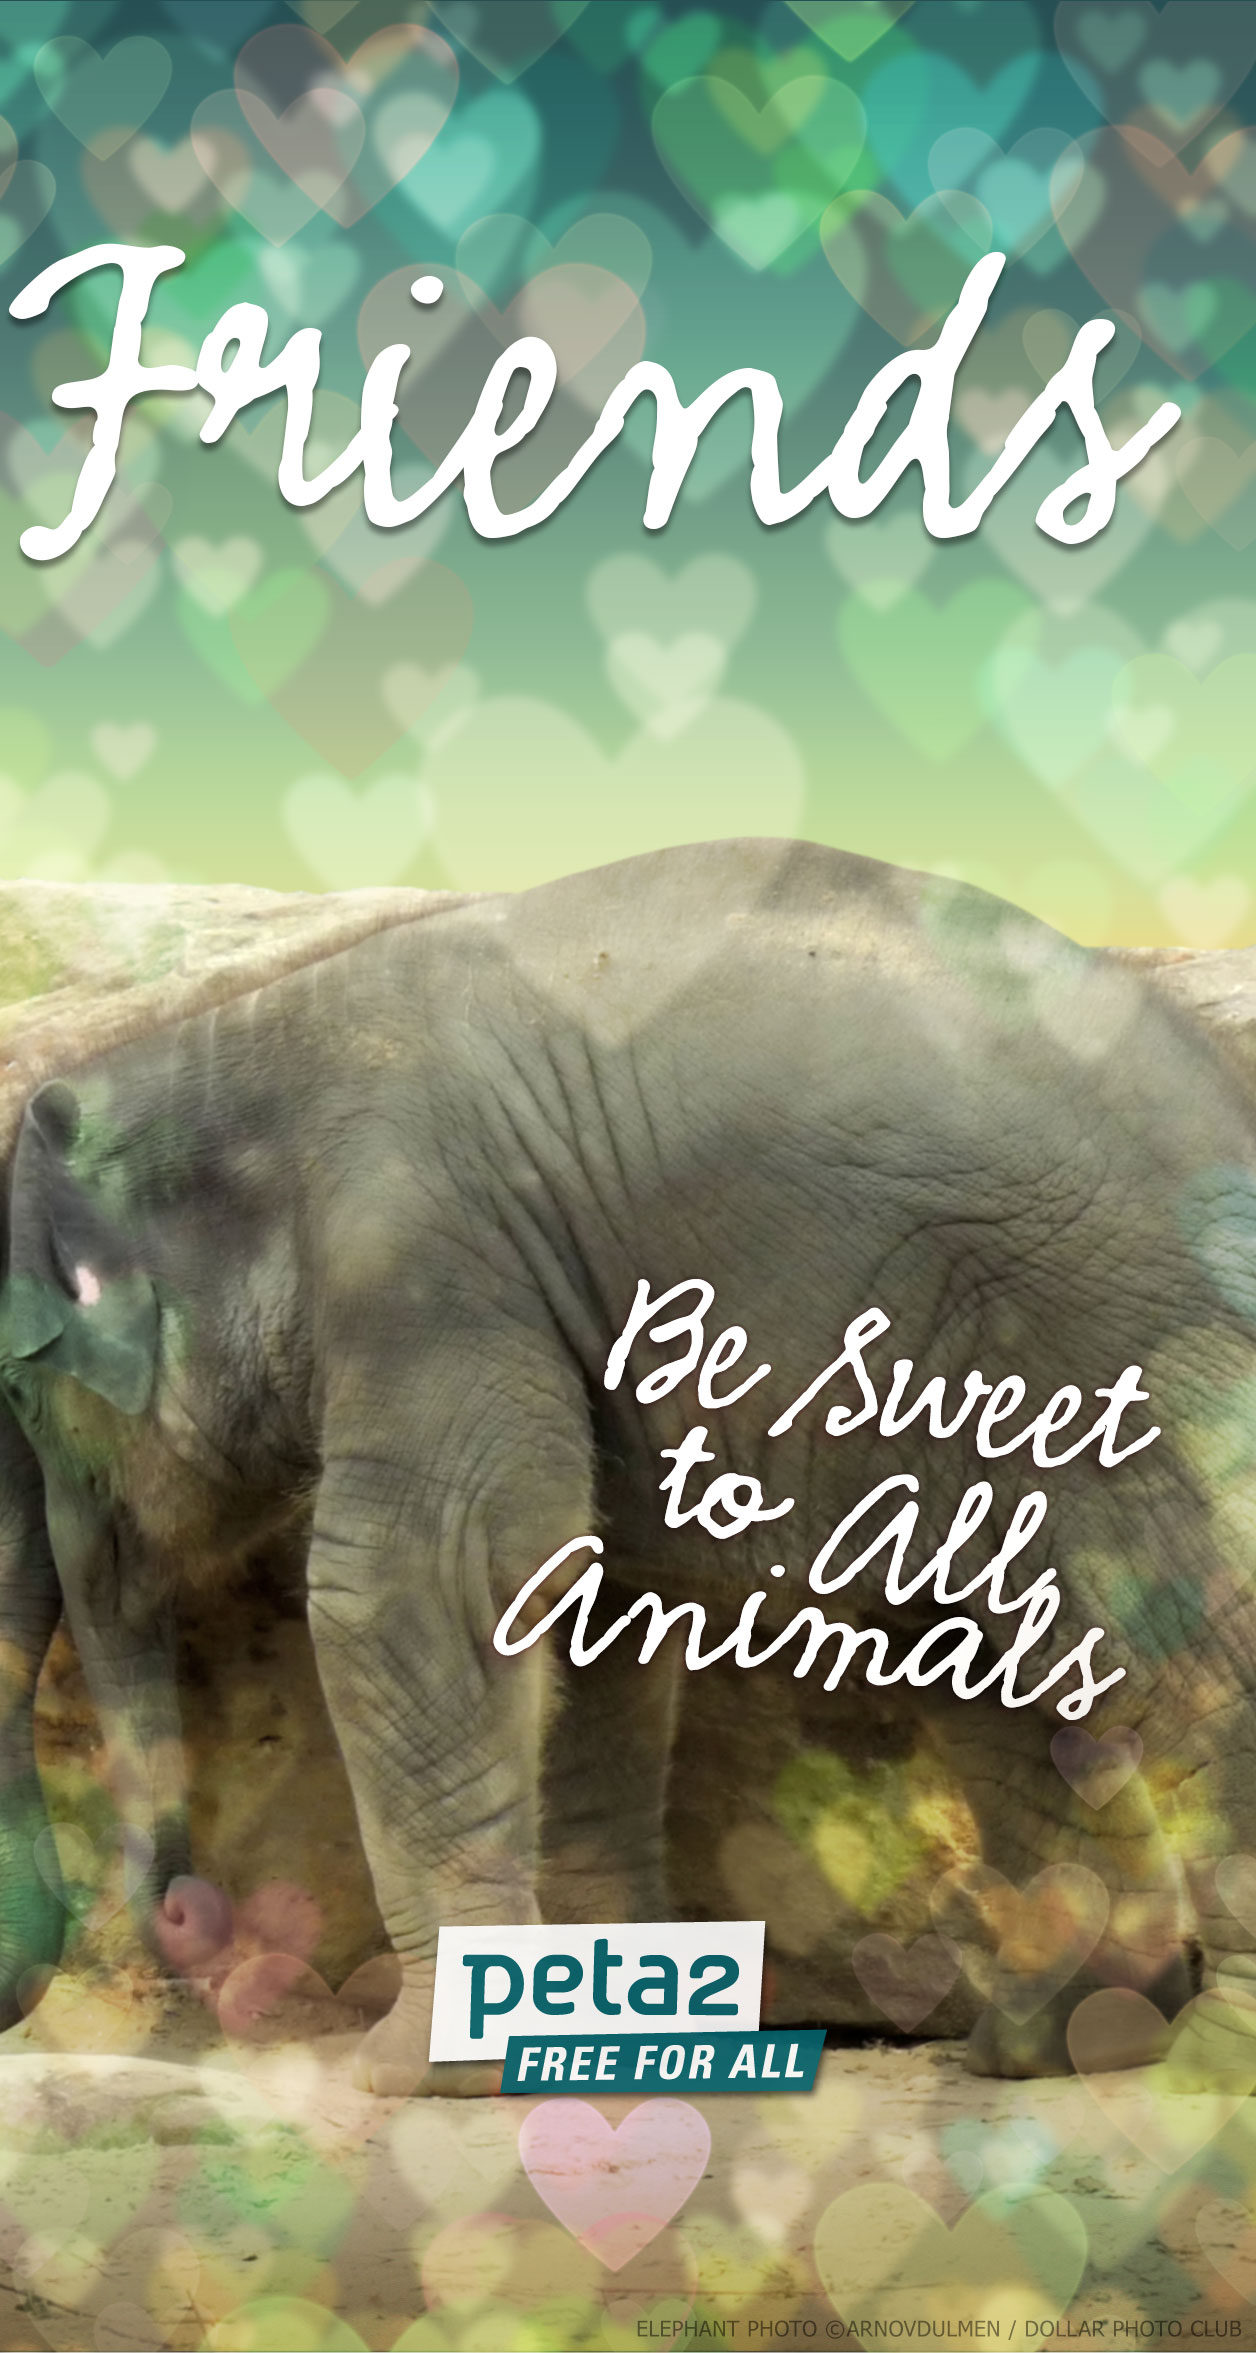 FREE Valentine's Day Phone Backgrounds | Take Action | peta2.com